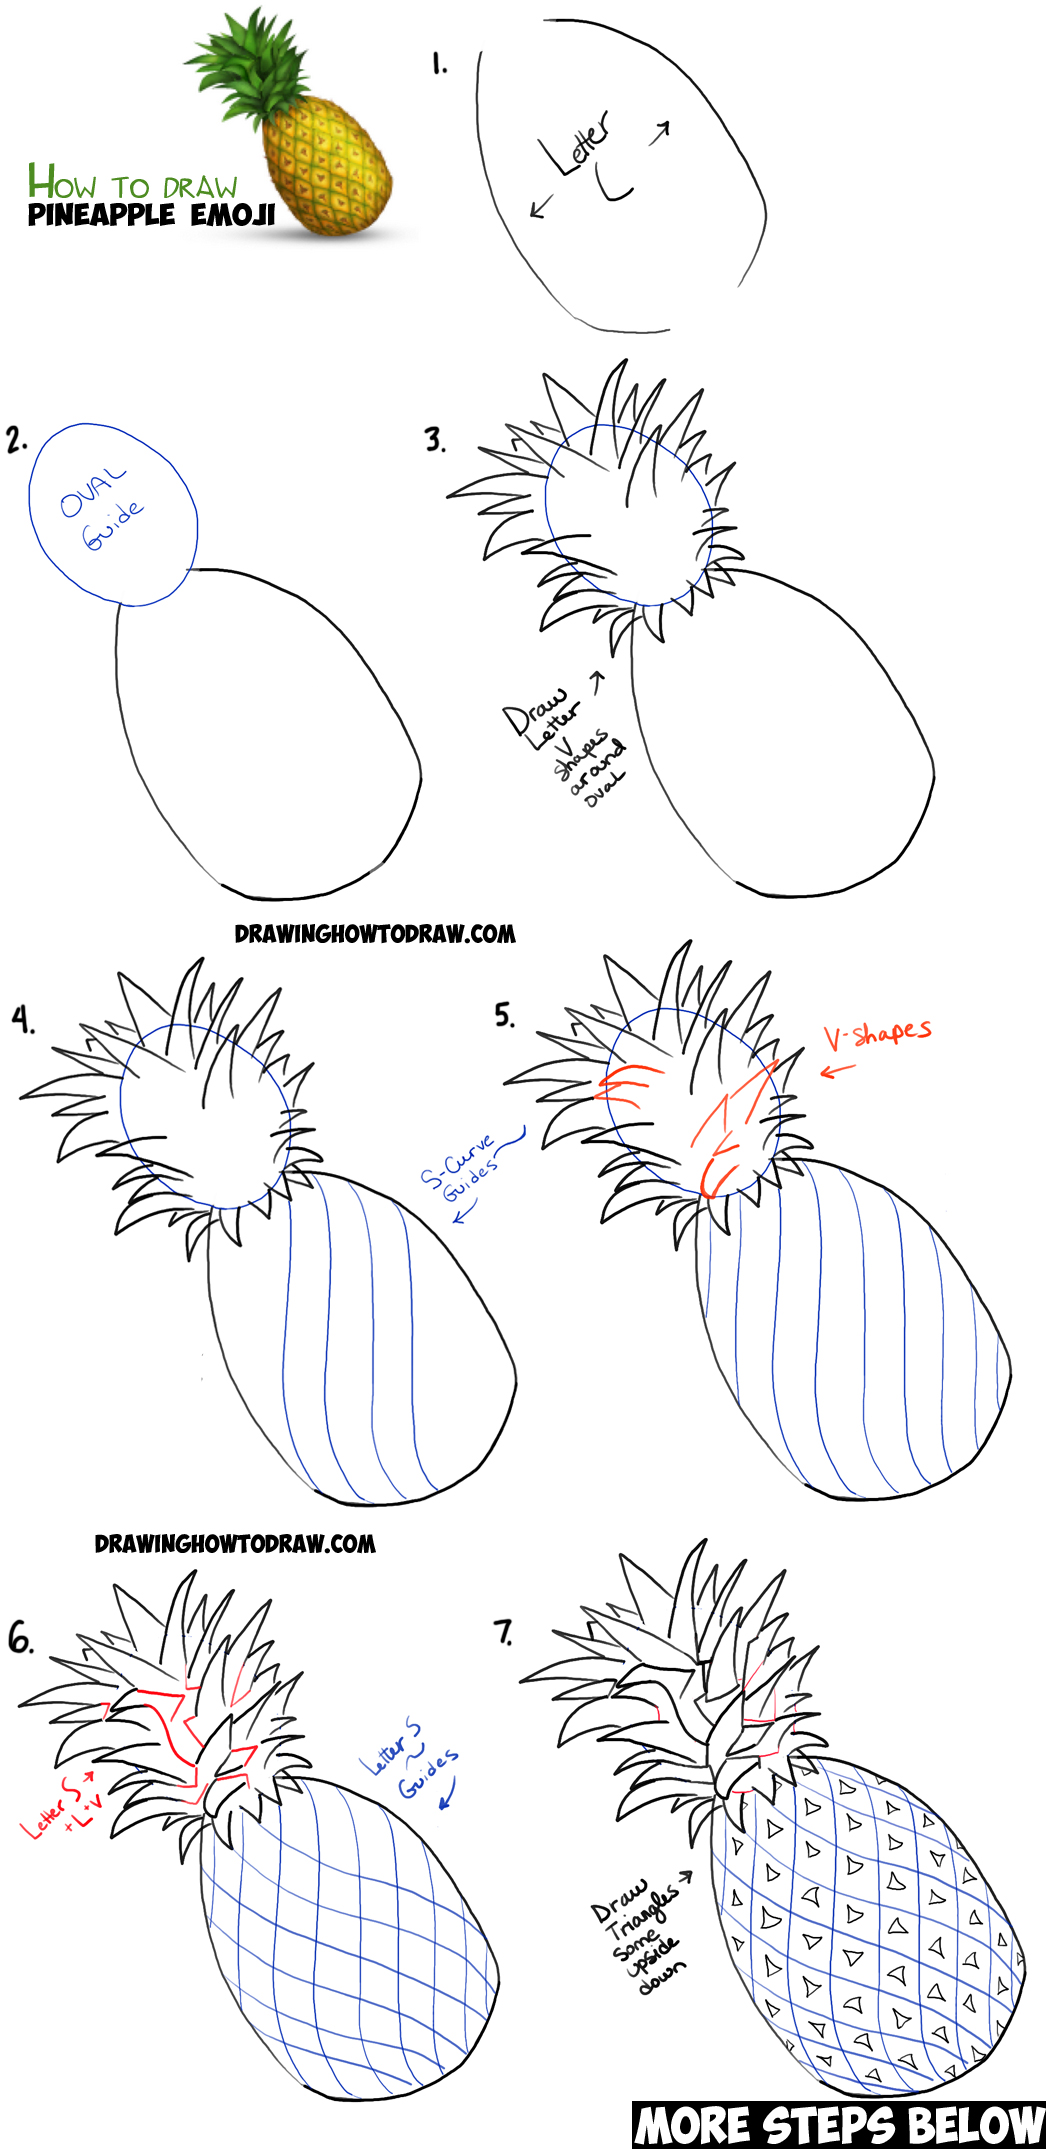 learn how to draw a pineapple emoji step by step instructions